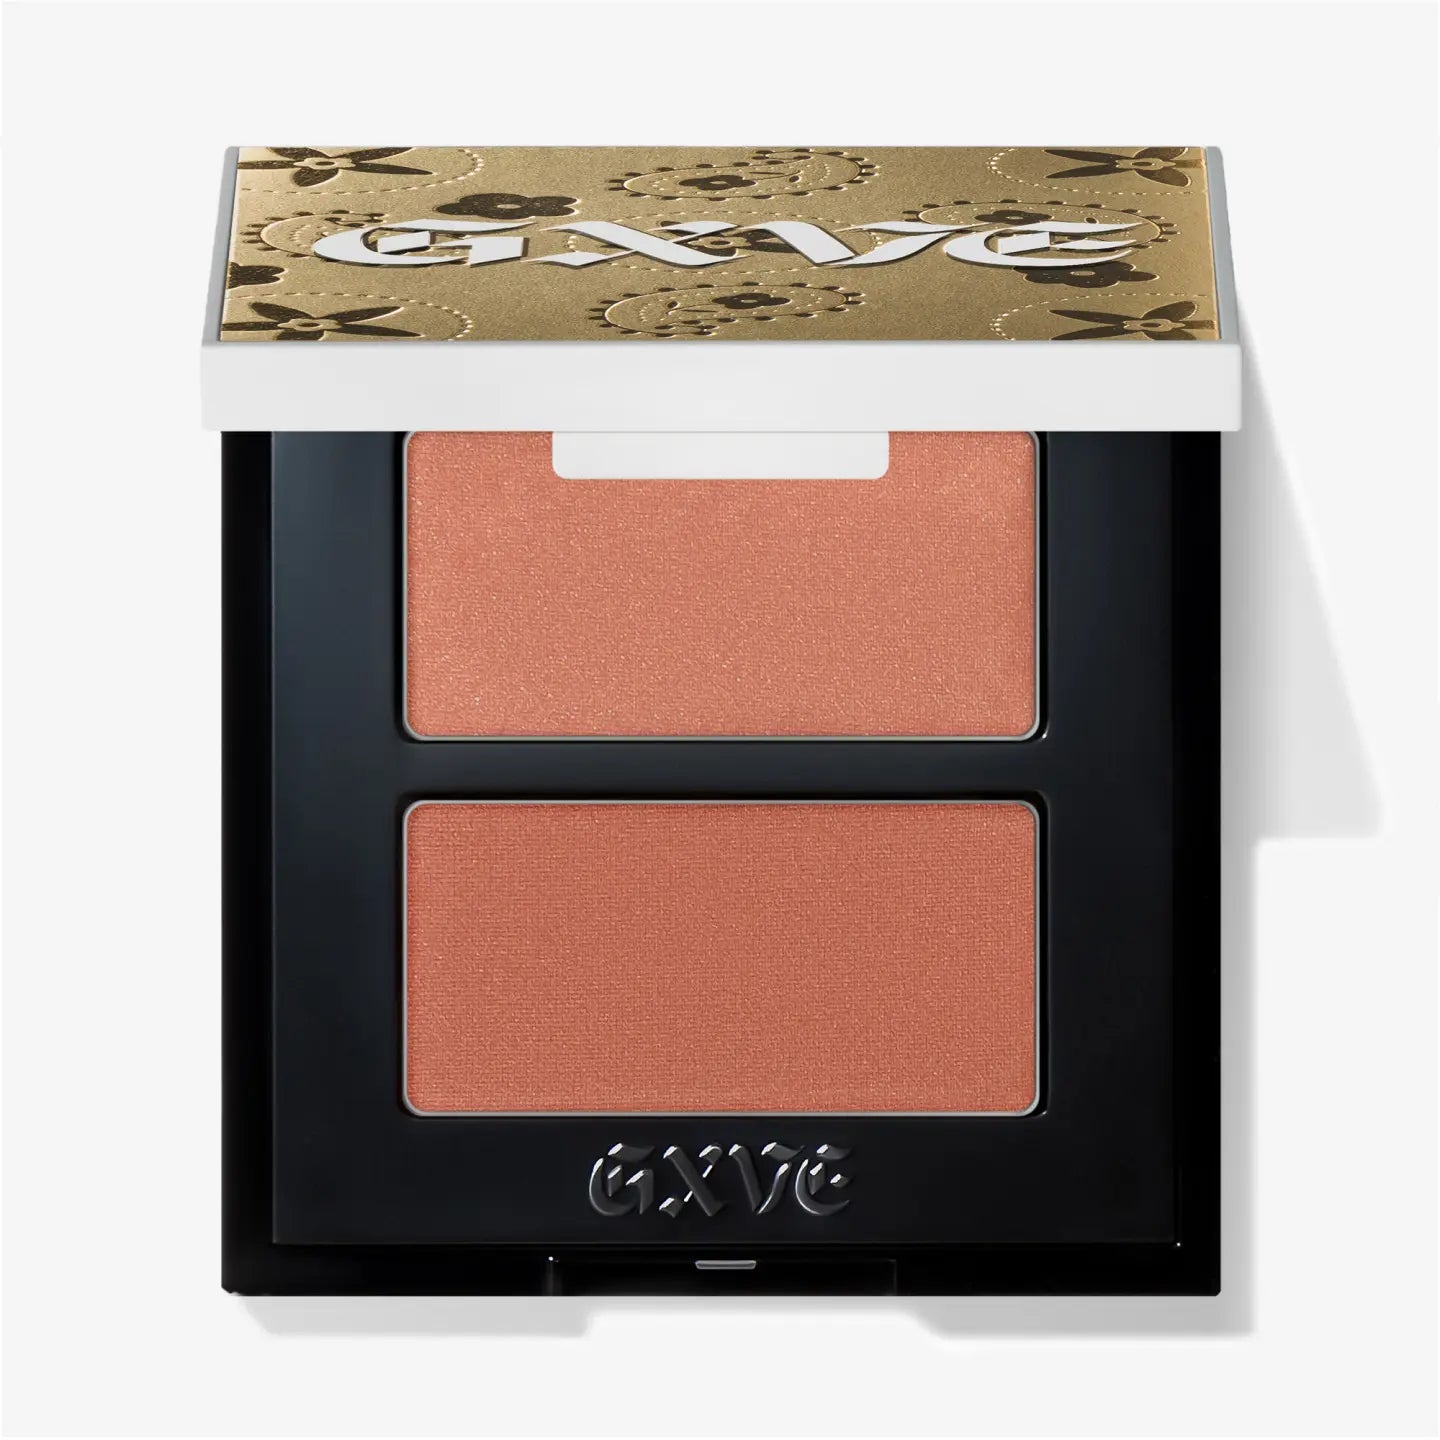 GXVE STARS ALIGNED - Clean Amplifying Blush Duo